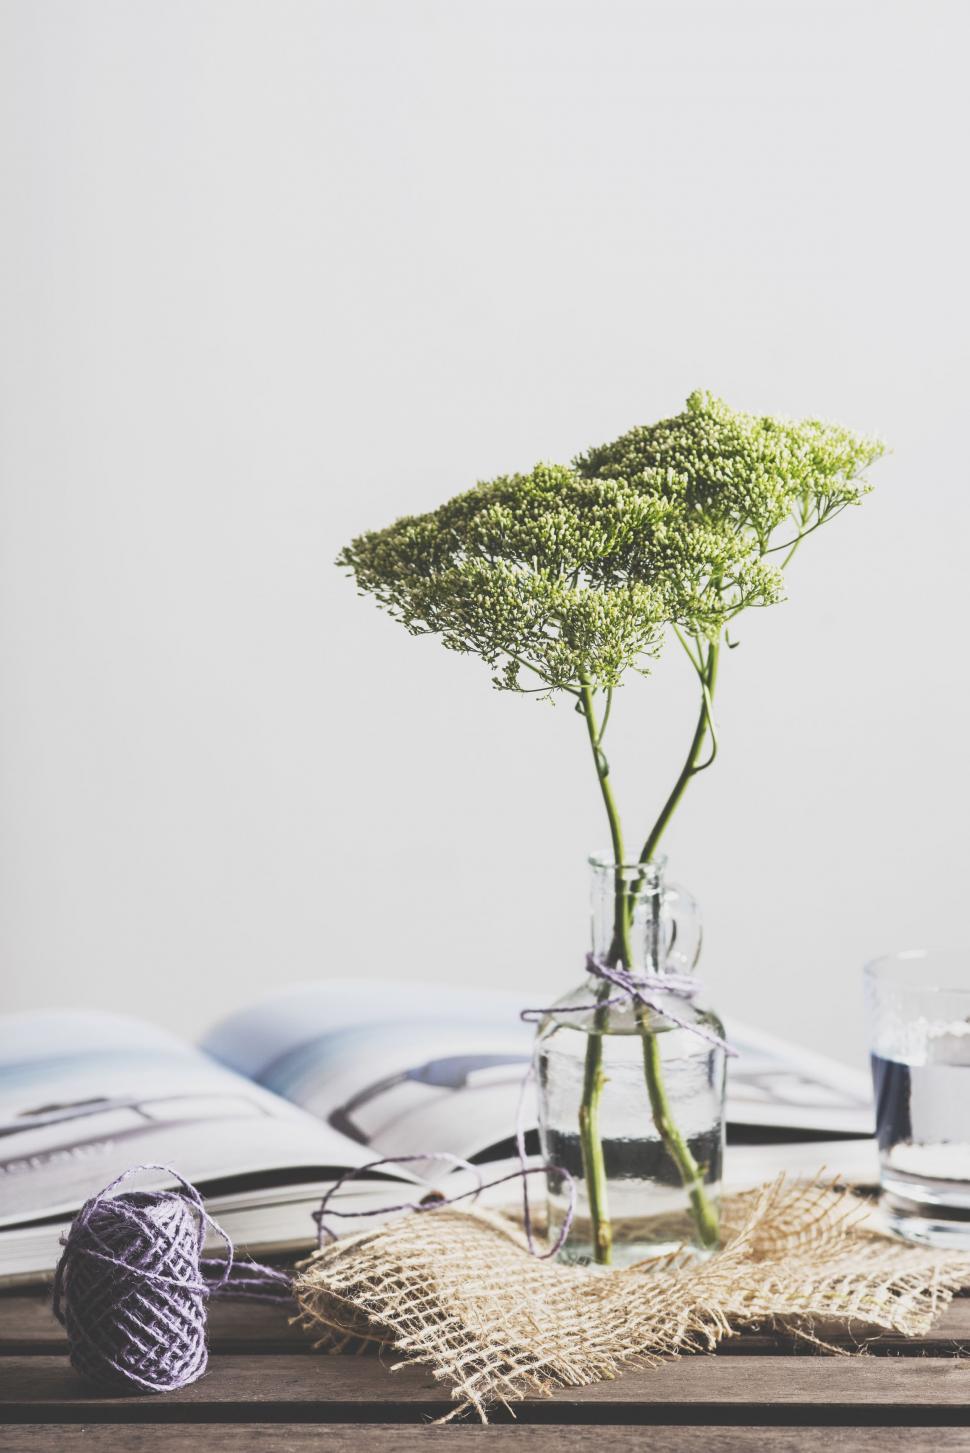 Free Image of Vase With Plant on Table 